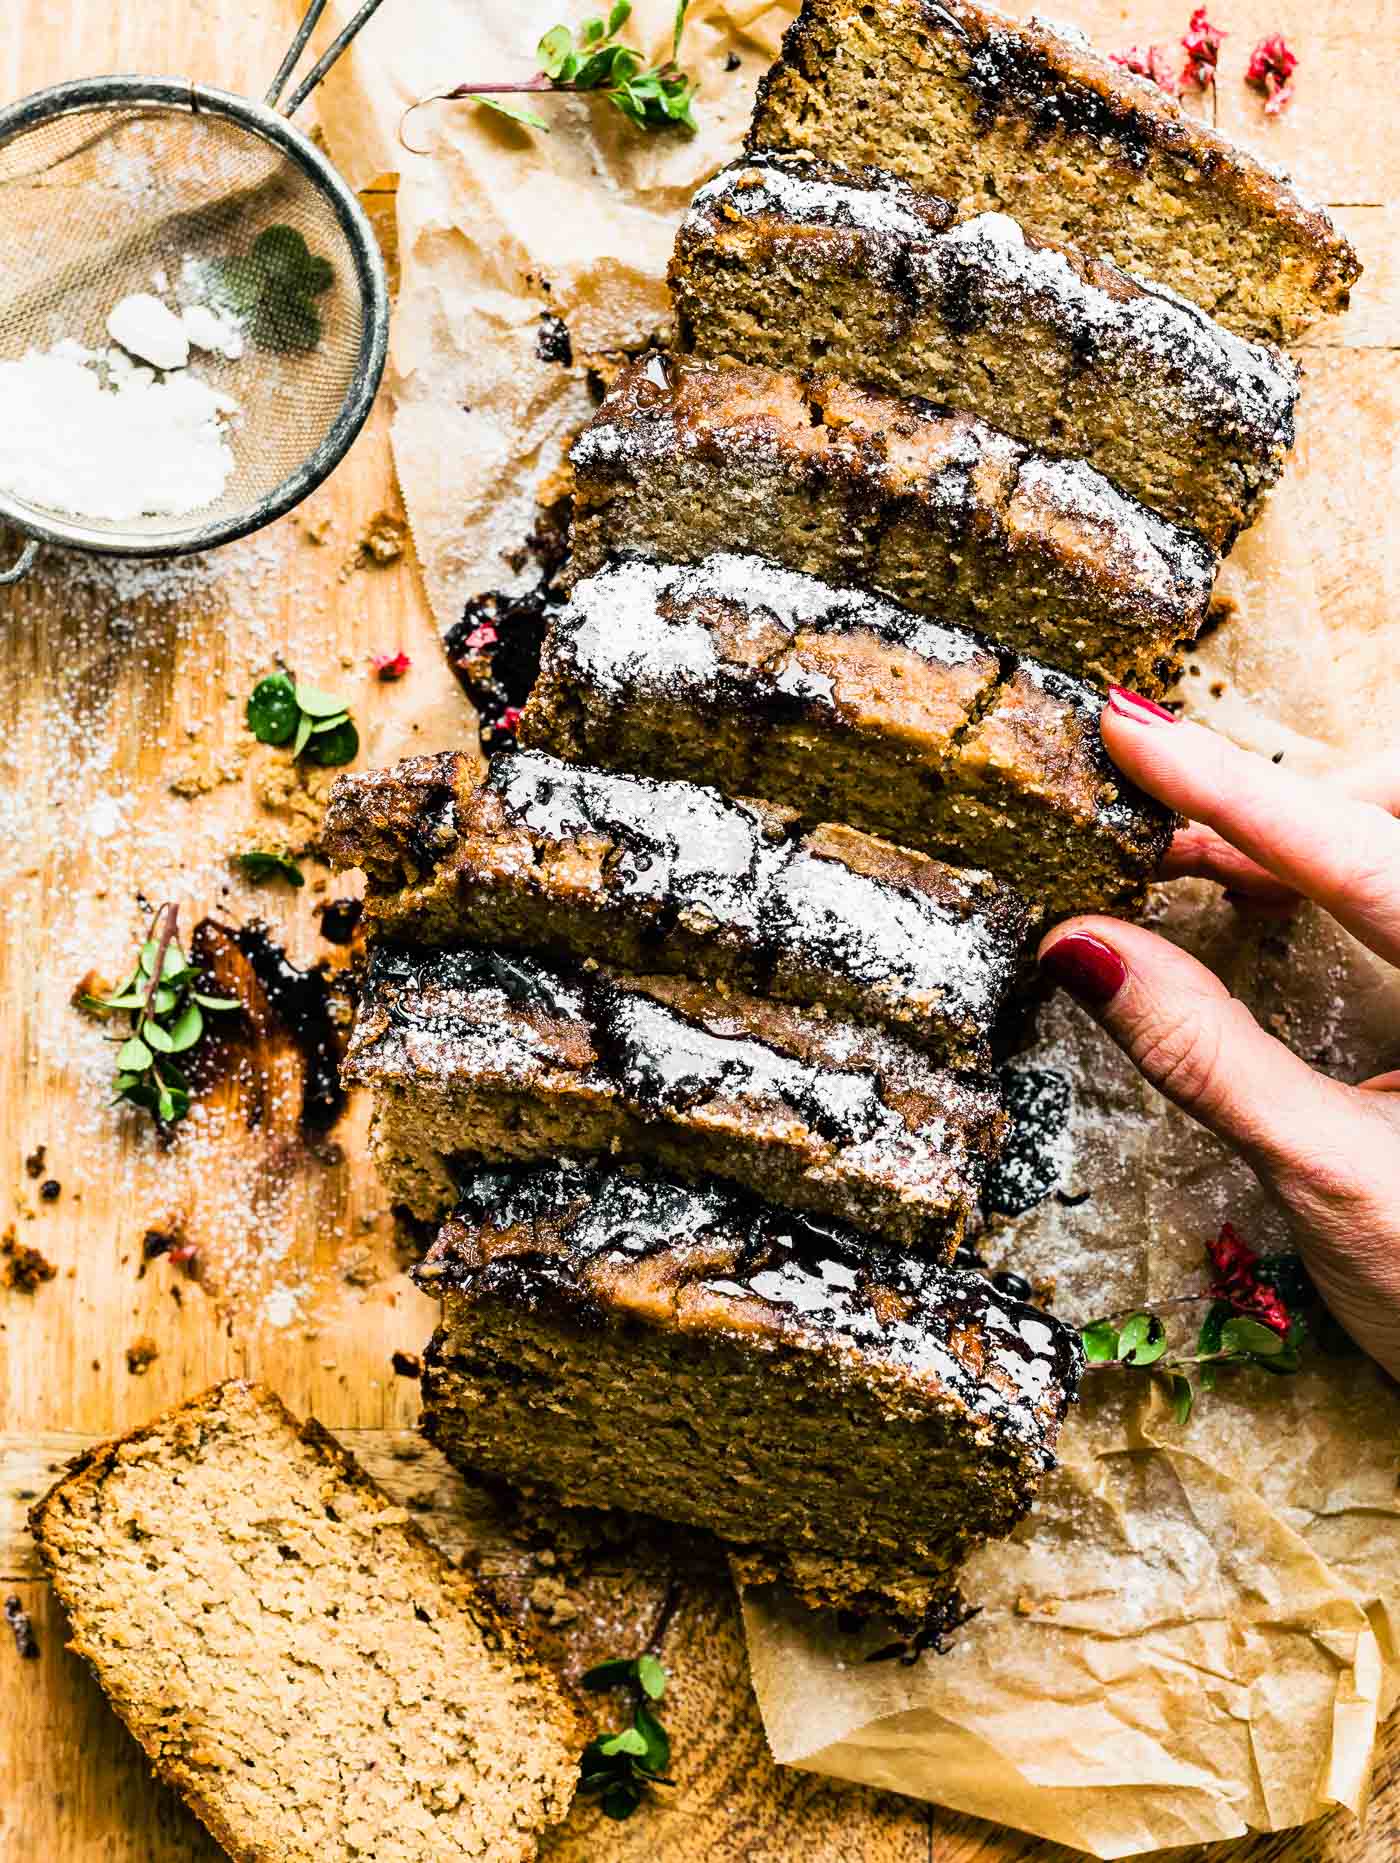 A hand removing a thick slices of Irish Cream Banana Bread from the middle of cut loaf, on a wooden cutting board.